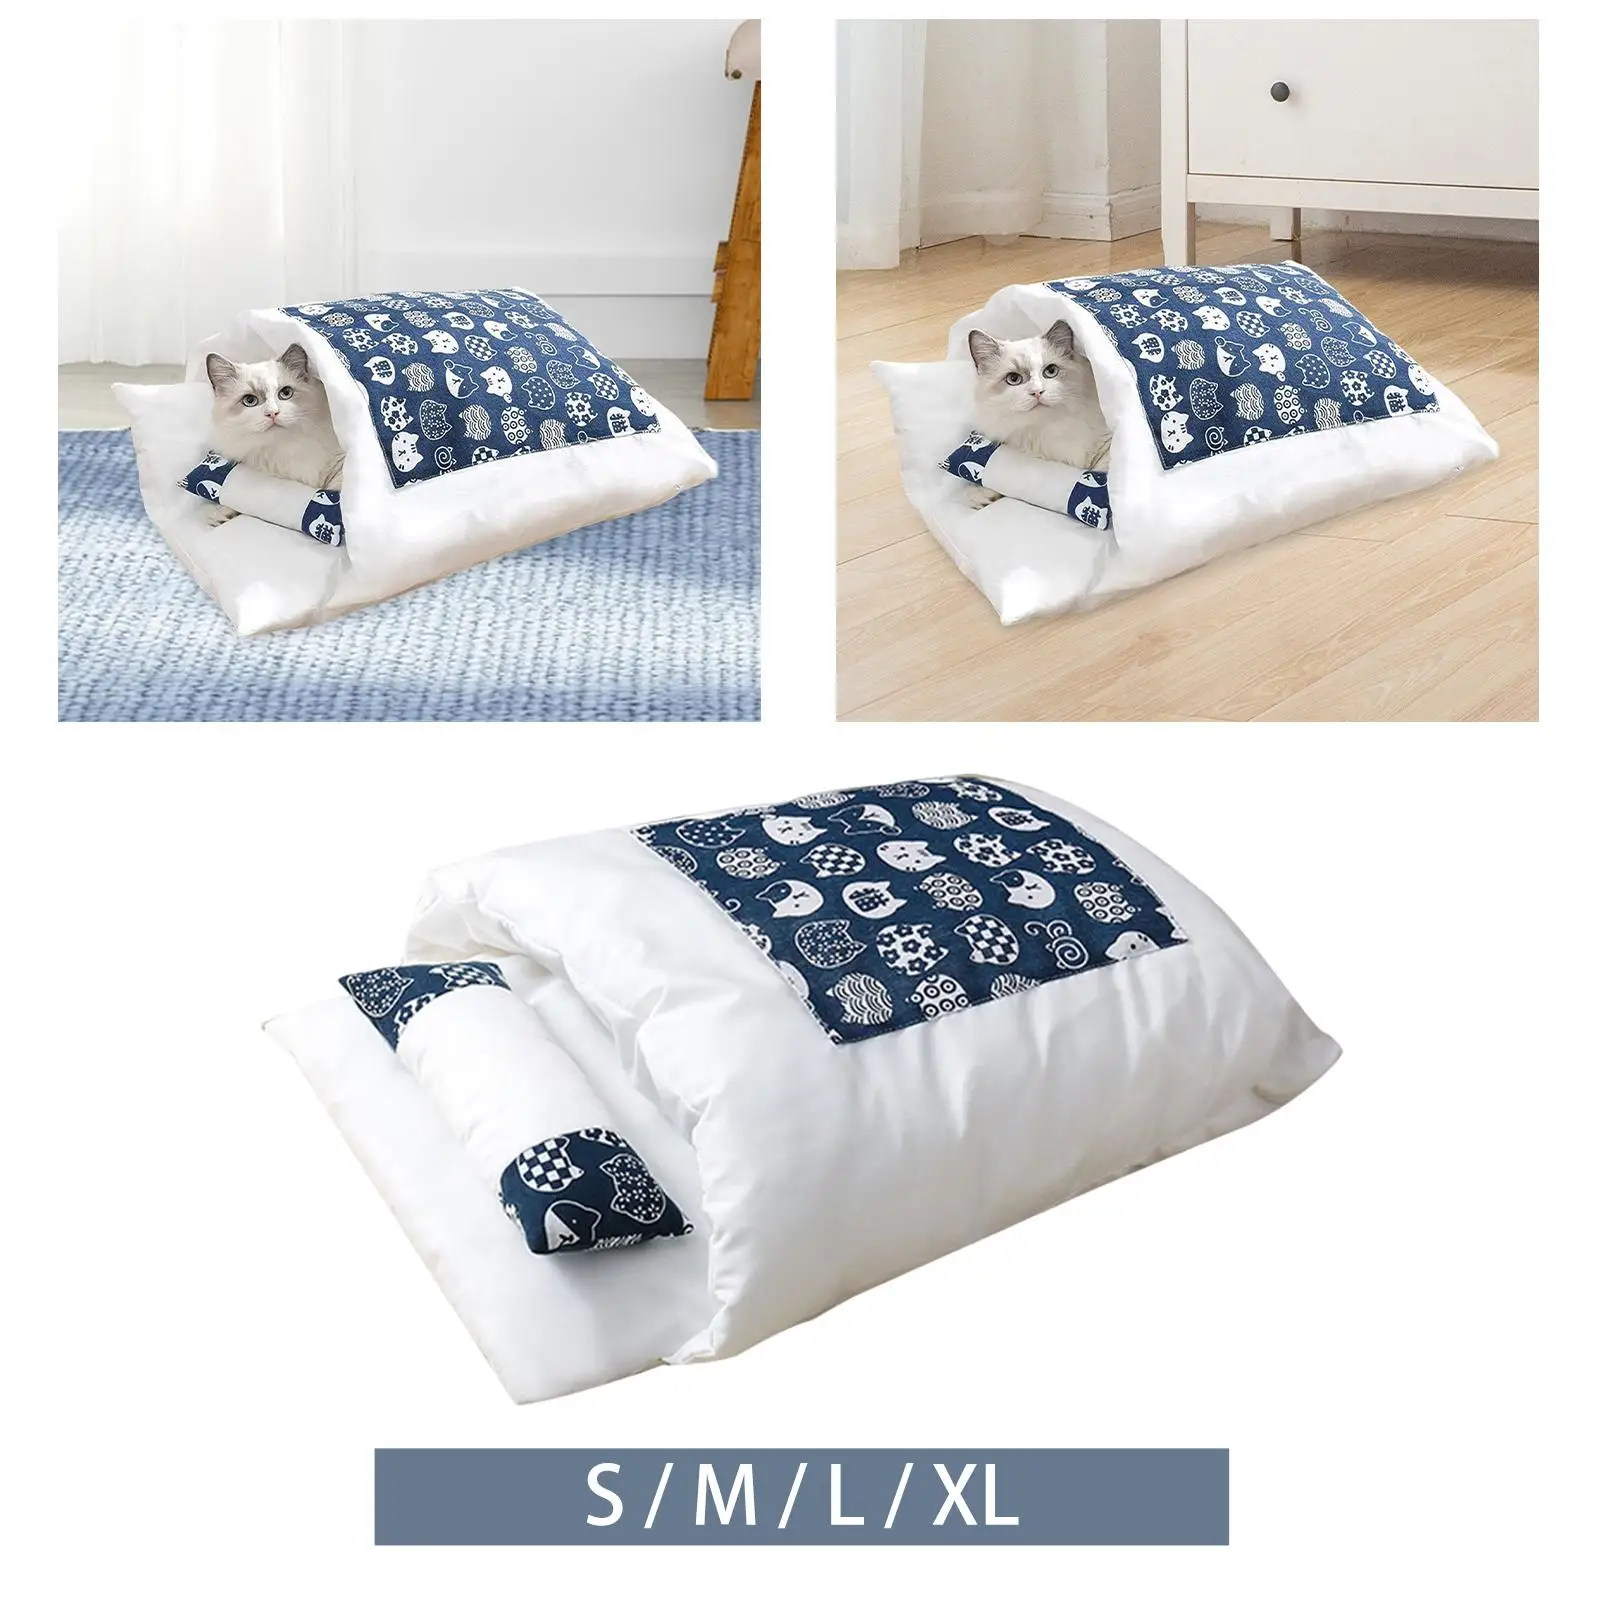 Cat Bed Winter Warm Sack Pouch Self Warming Detachable Cat Resting Bed Pet Supplies Mat Sleeping Bags for Puppy,Kittens